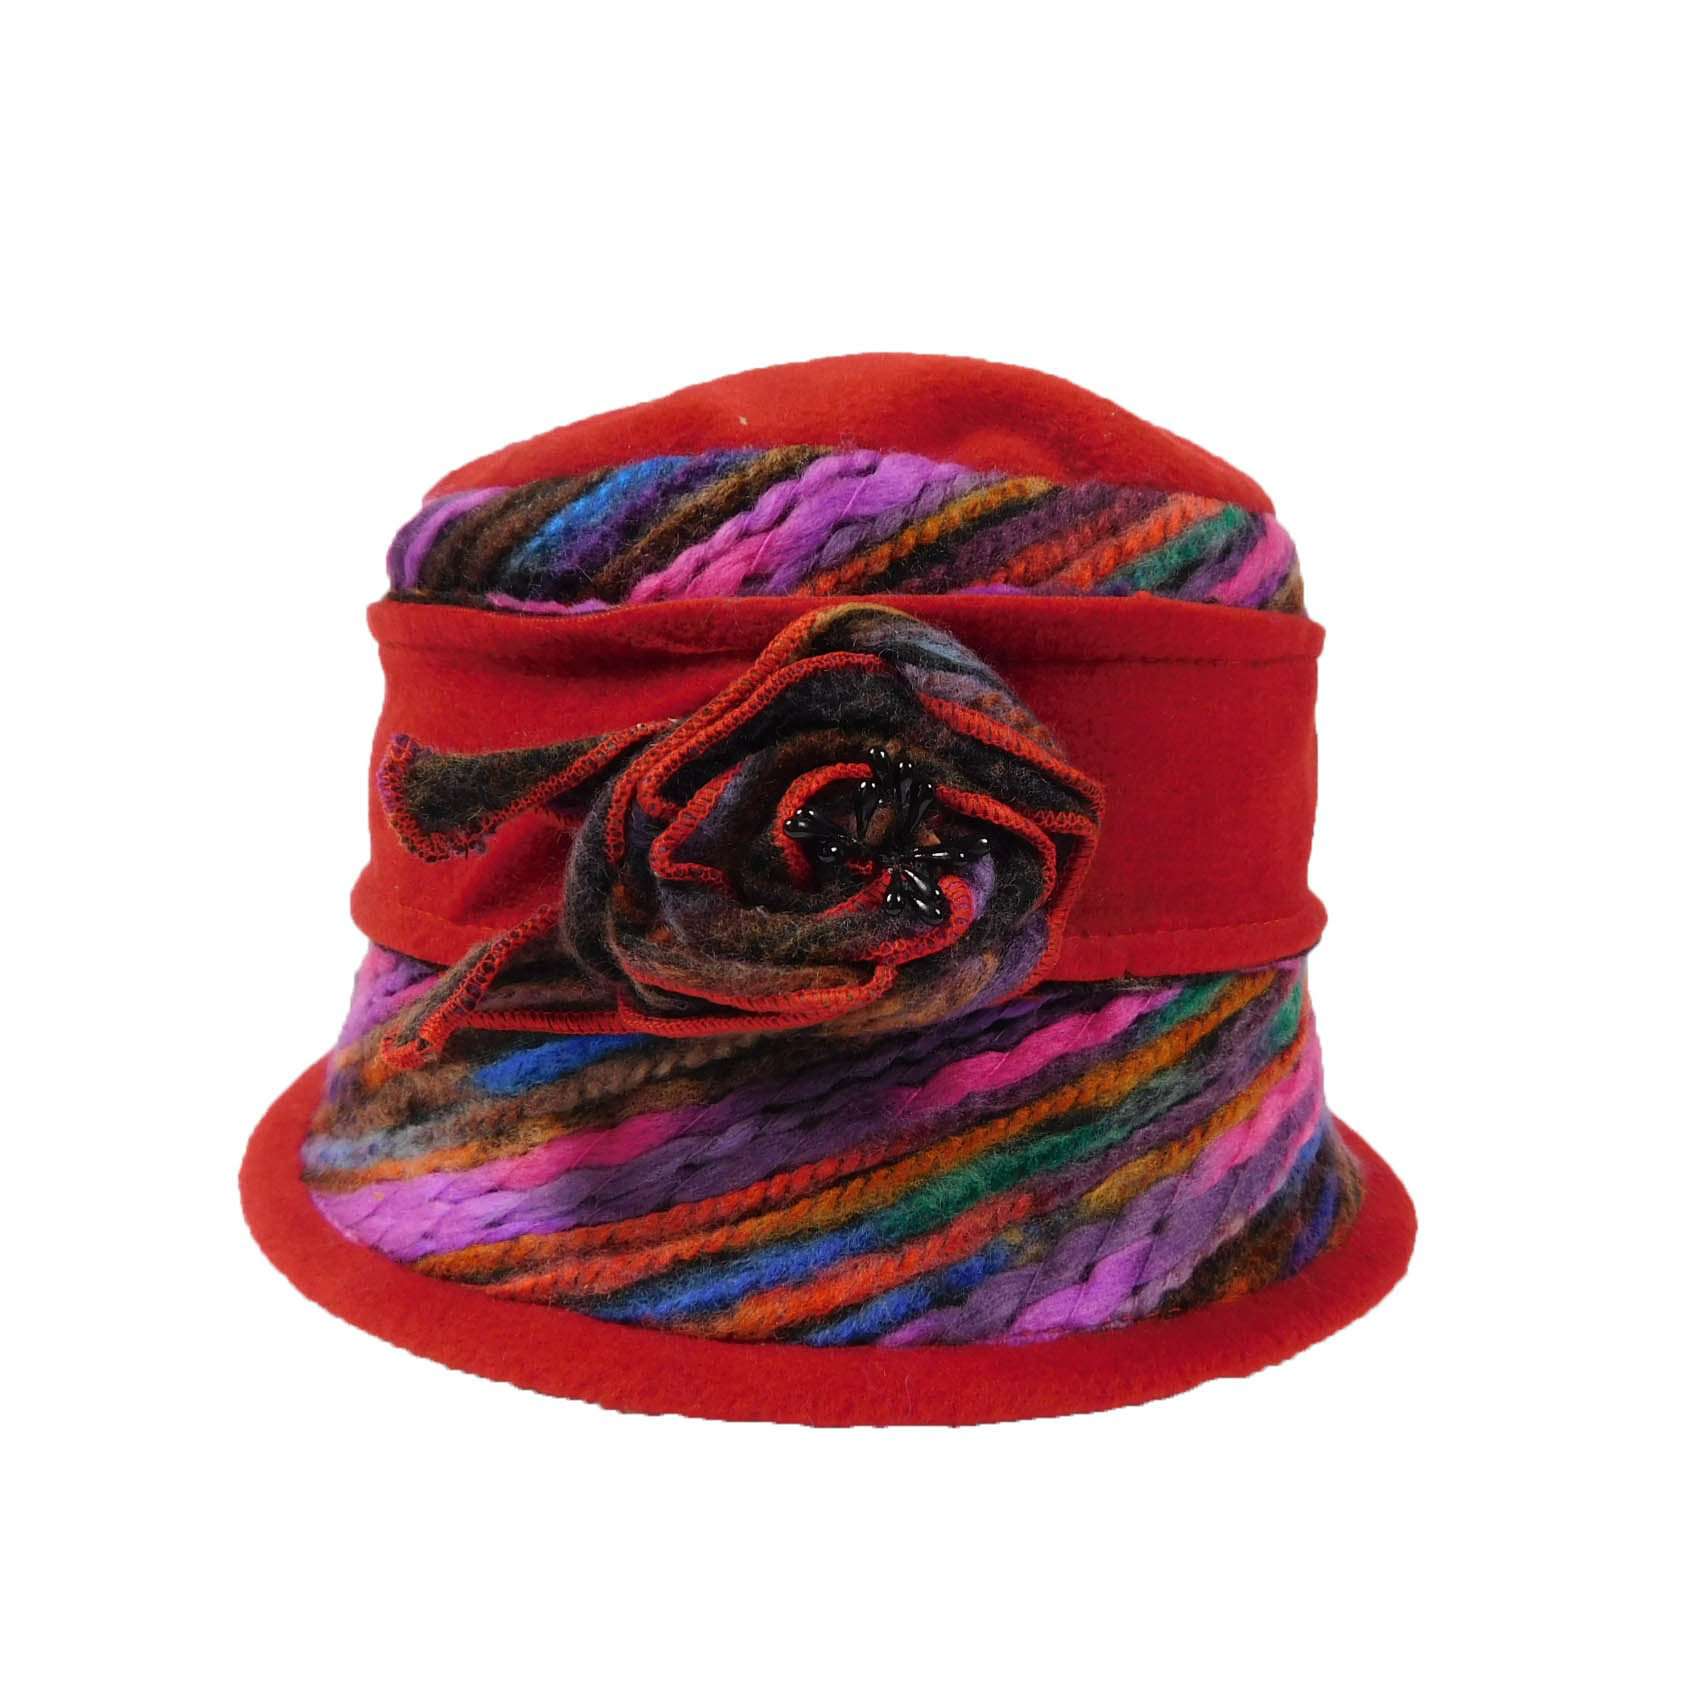 Fleece Beanie with Colorful Thread Accent by JSA for Women Beanie Jeanne Simmons js7368RD Red  